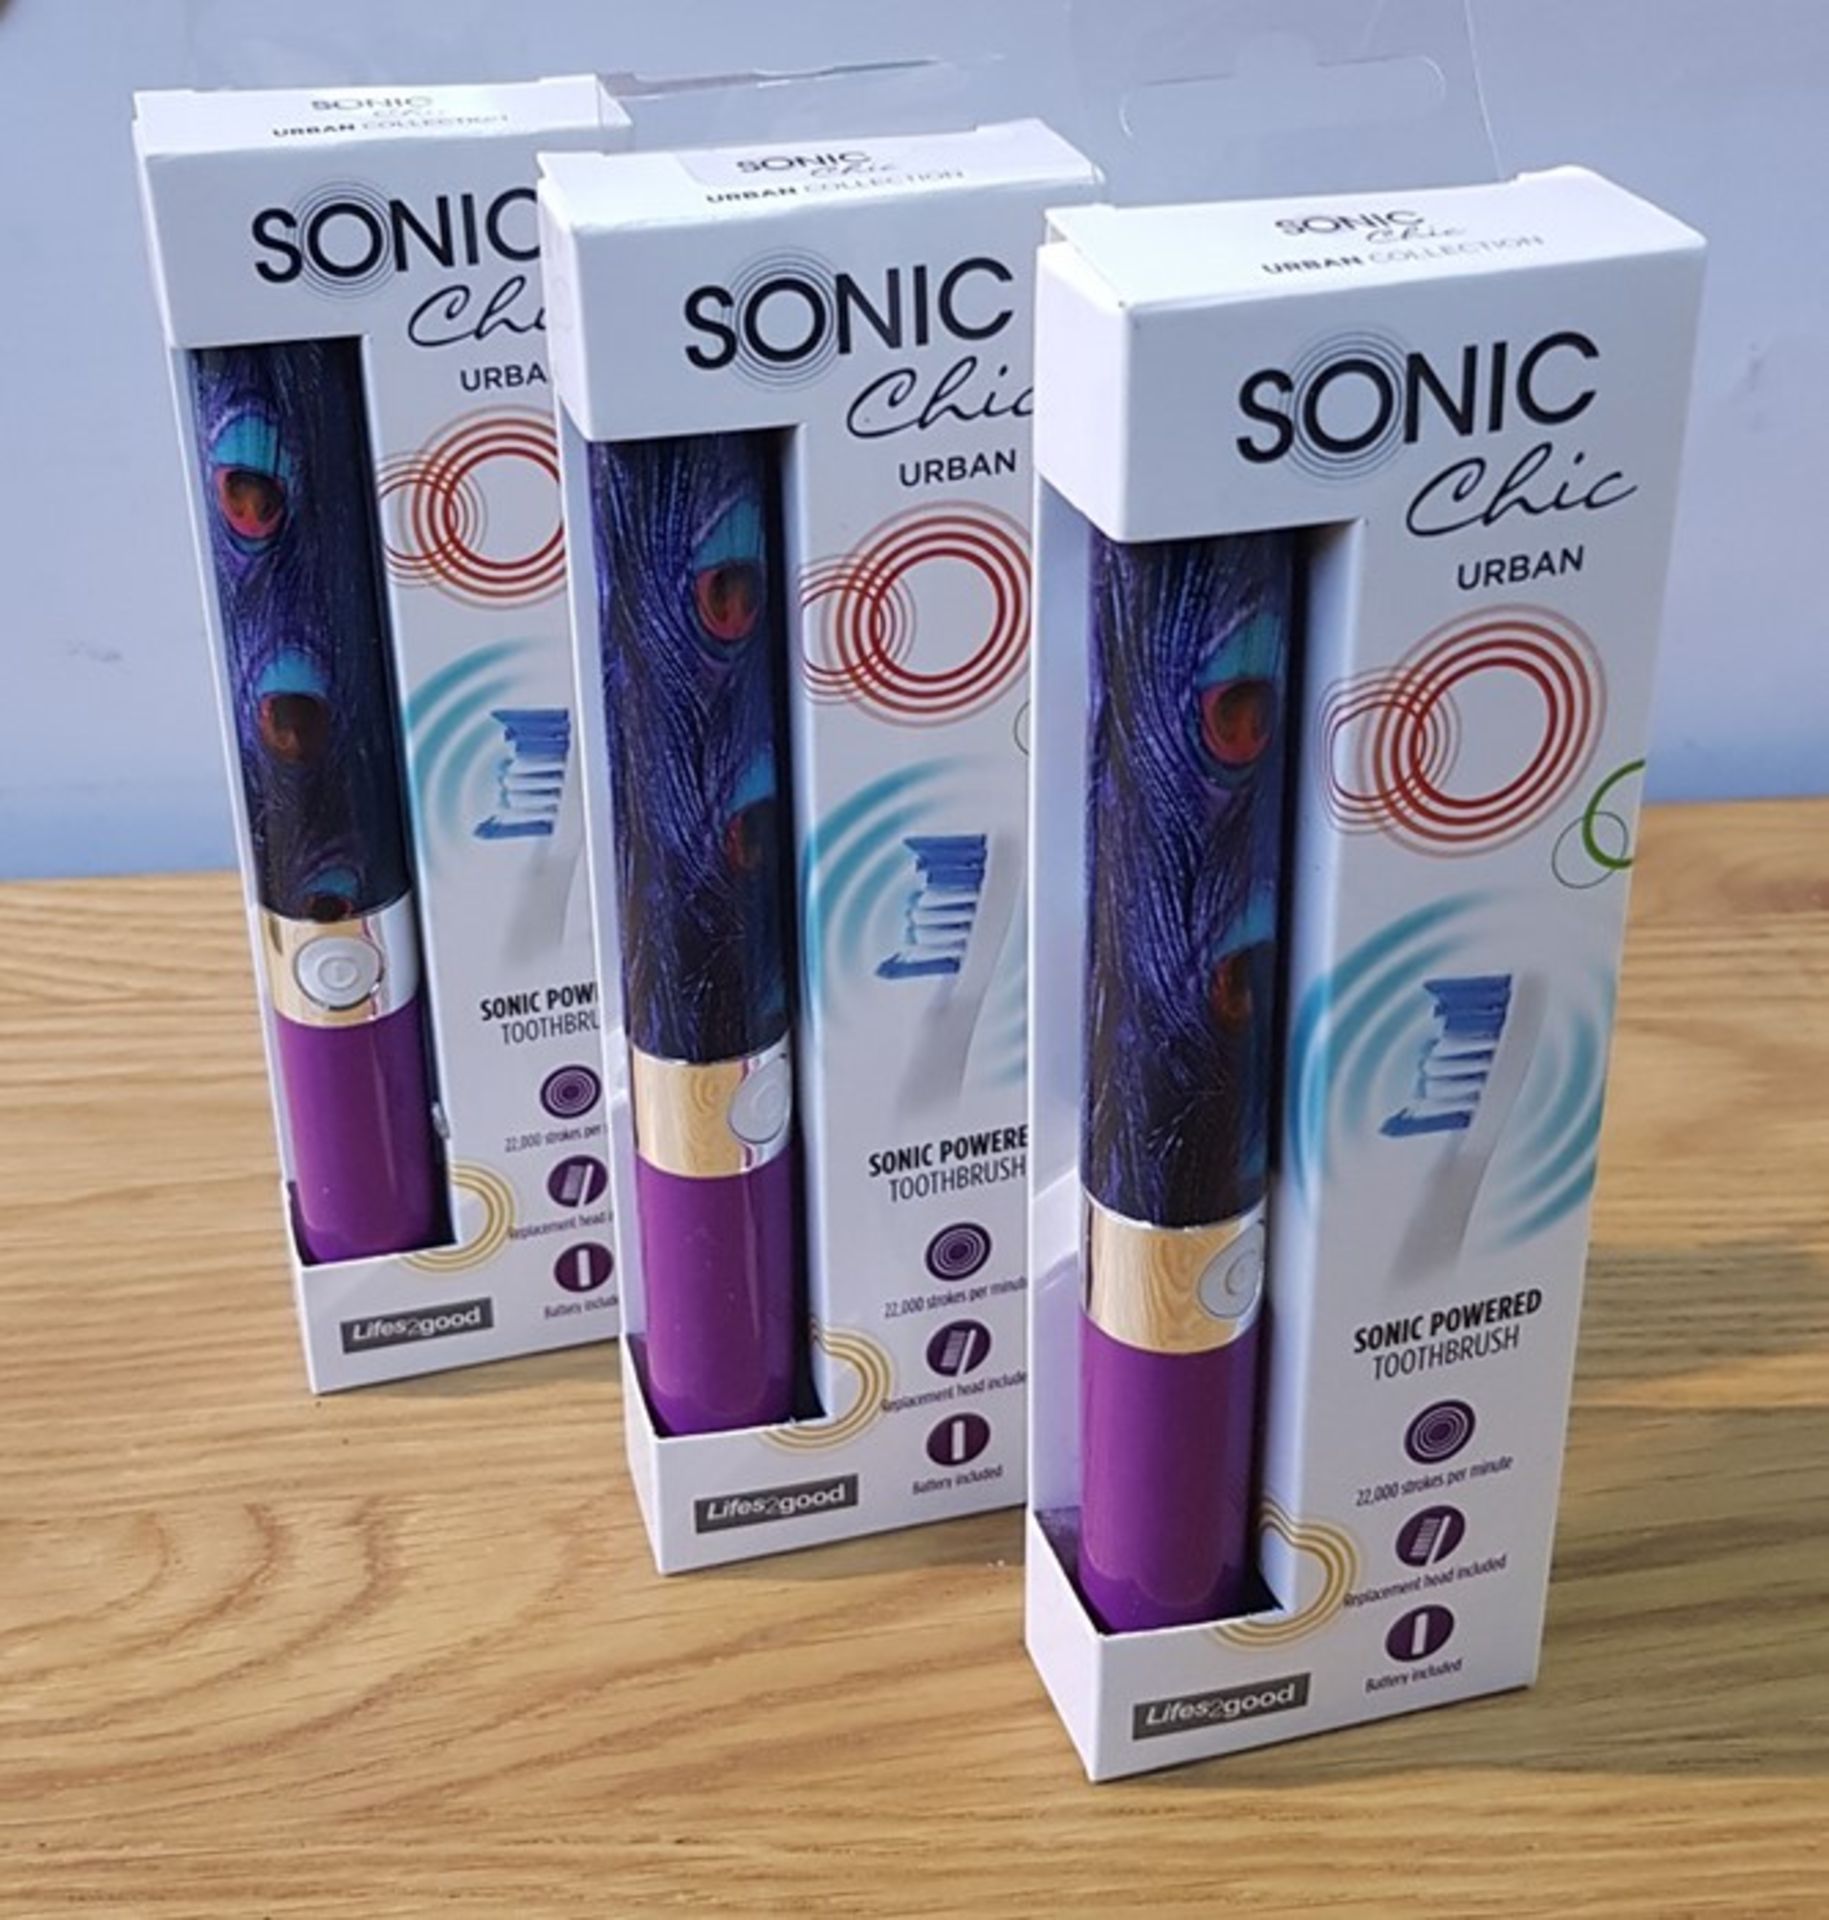 1 LOT TO CONTAIN 3 SONIC CHIC URBAN BATTERY POWERED TOOTHBRUSHES / RRP £88.00 (VIEWING HIGHLY